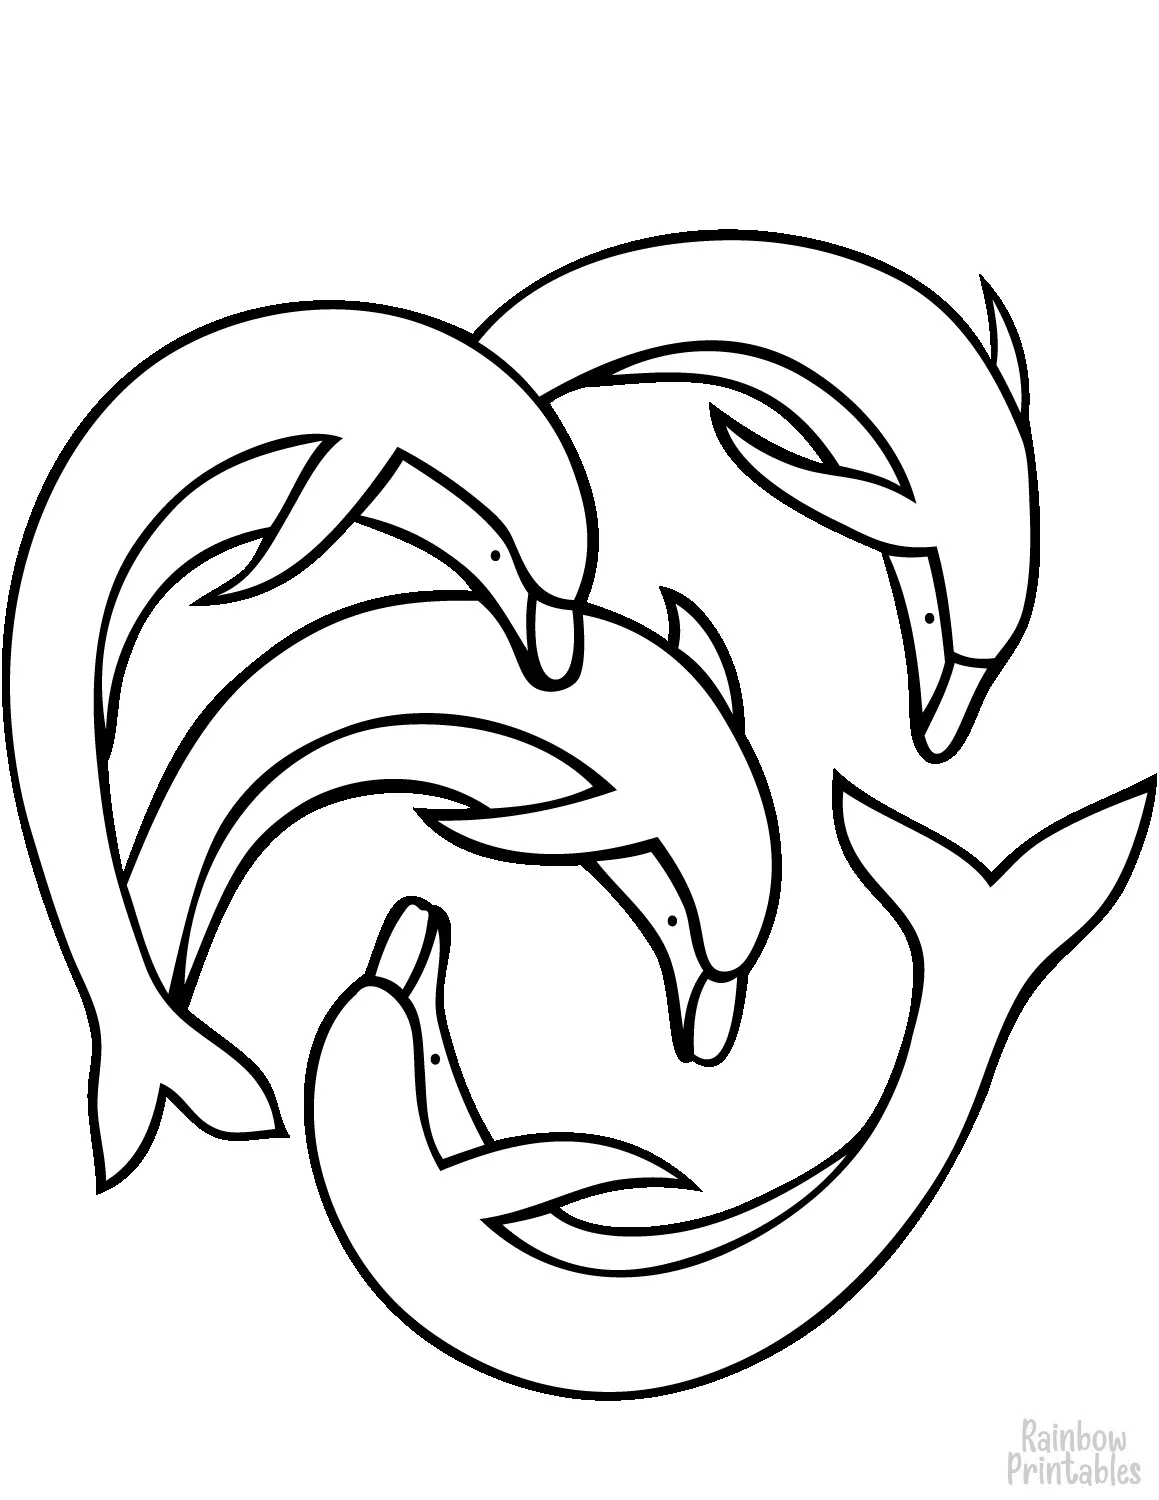 SIMPLE-EASY-line-drawings-FOUR SWIMMIING DOLPHINS-coloring-page-for-kids